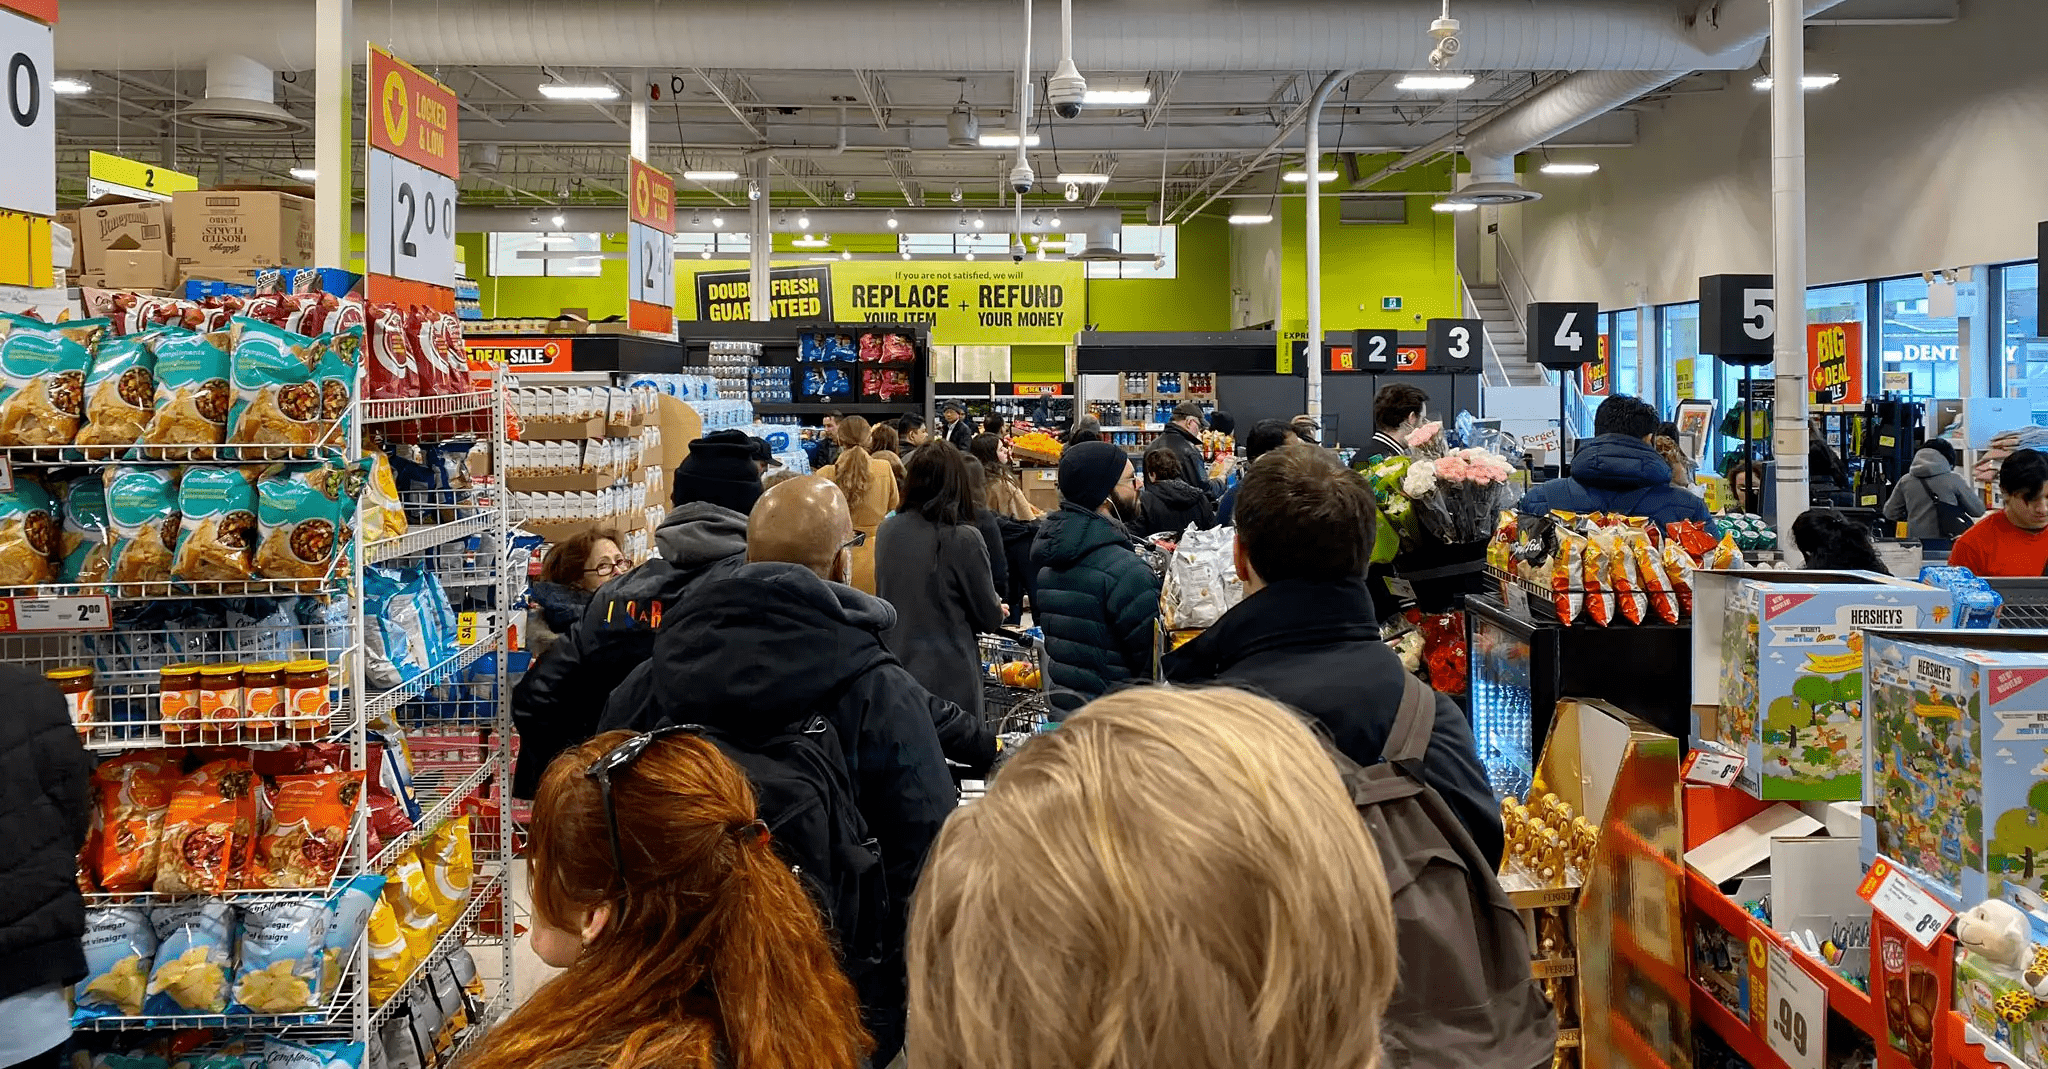 Long Lines In Your Retail Store. Avoid or Adopt?